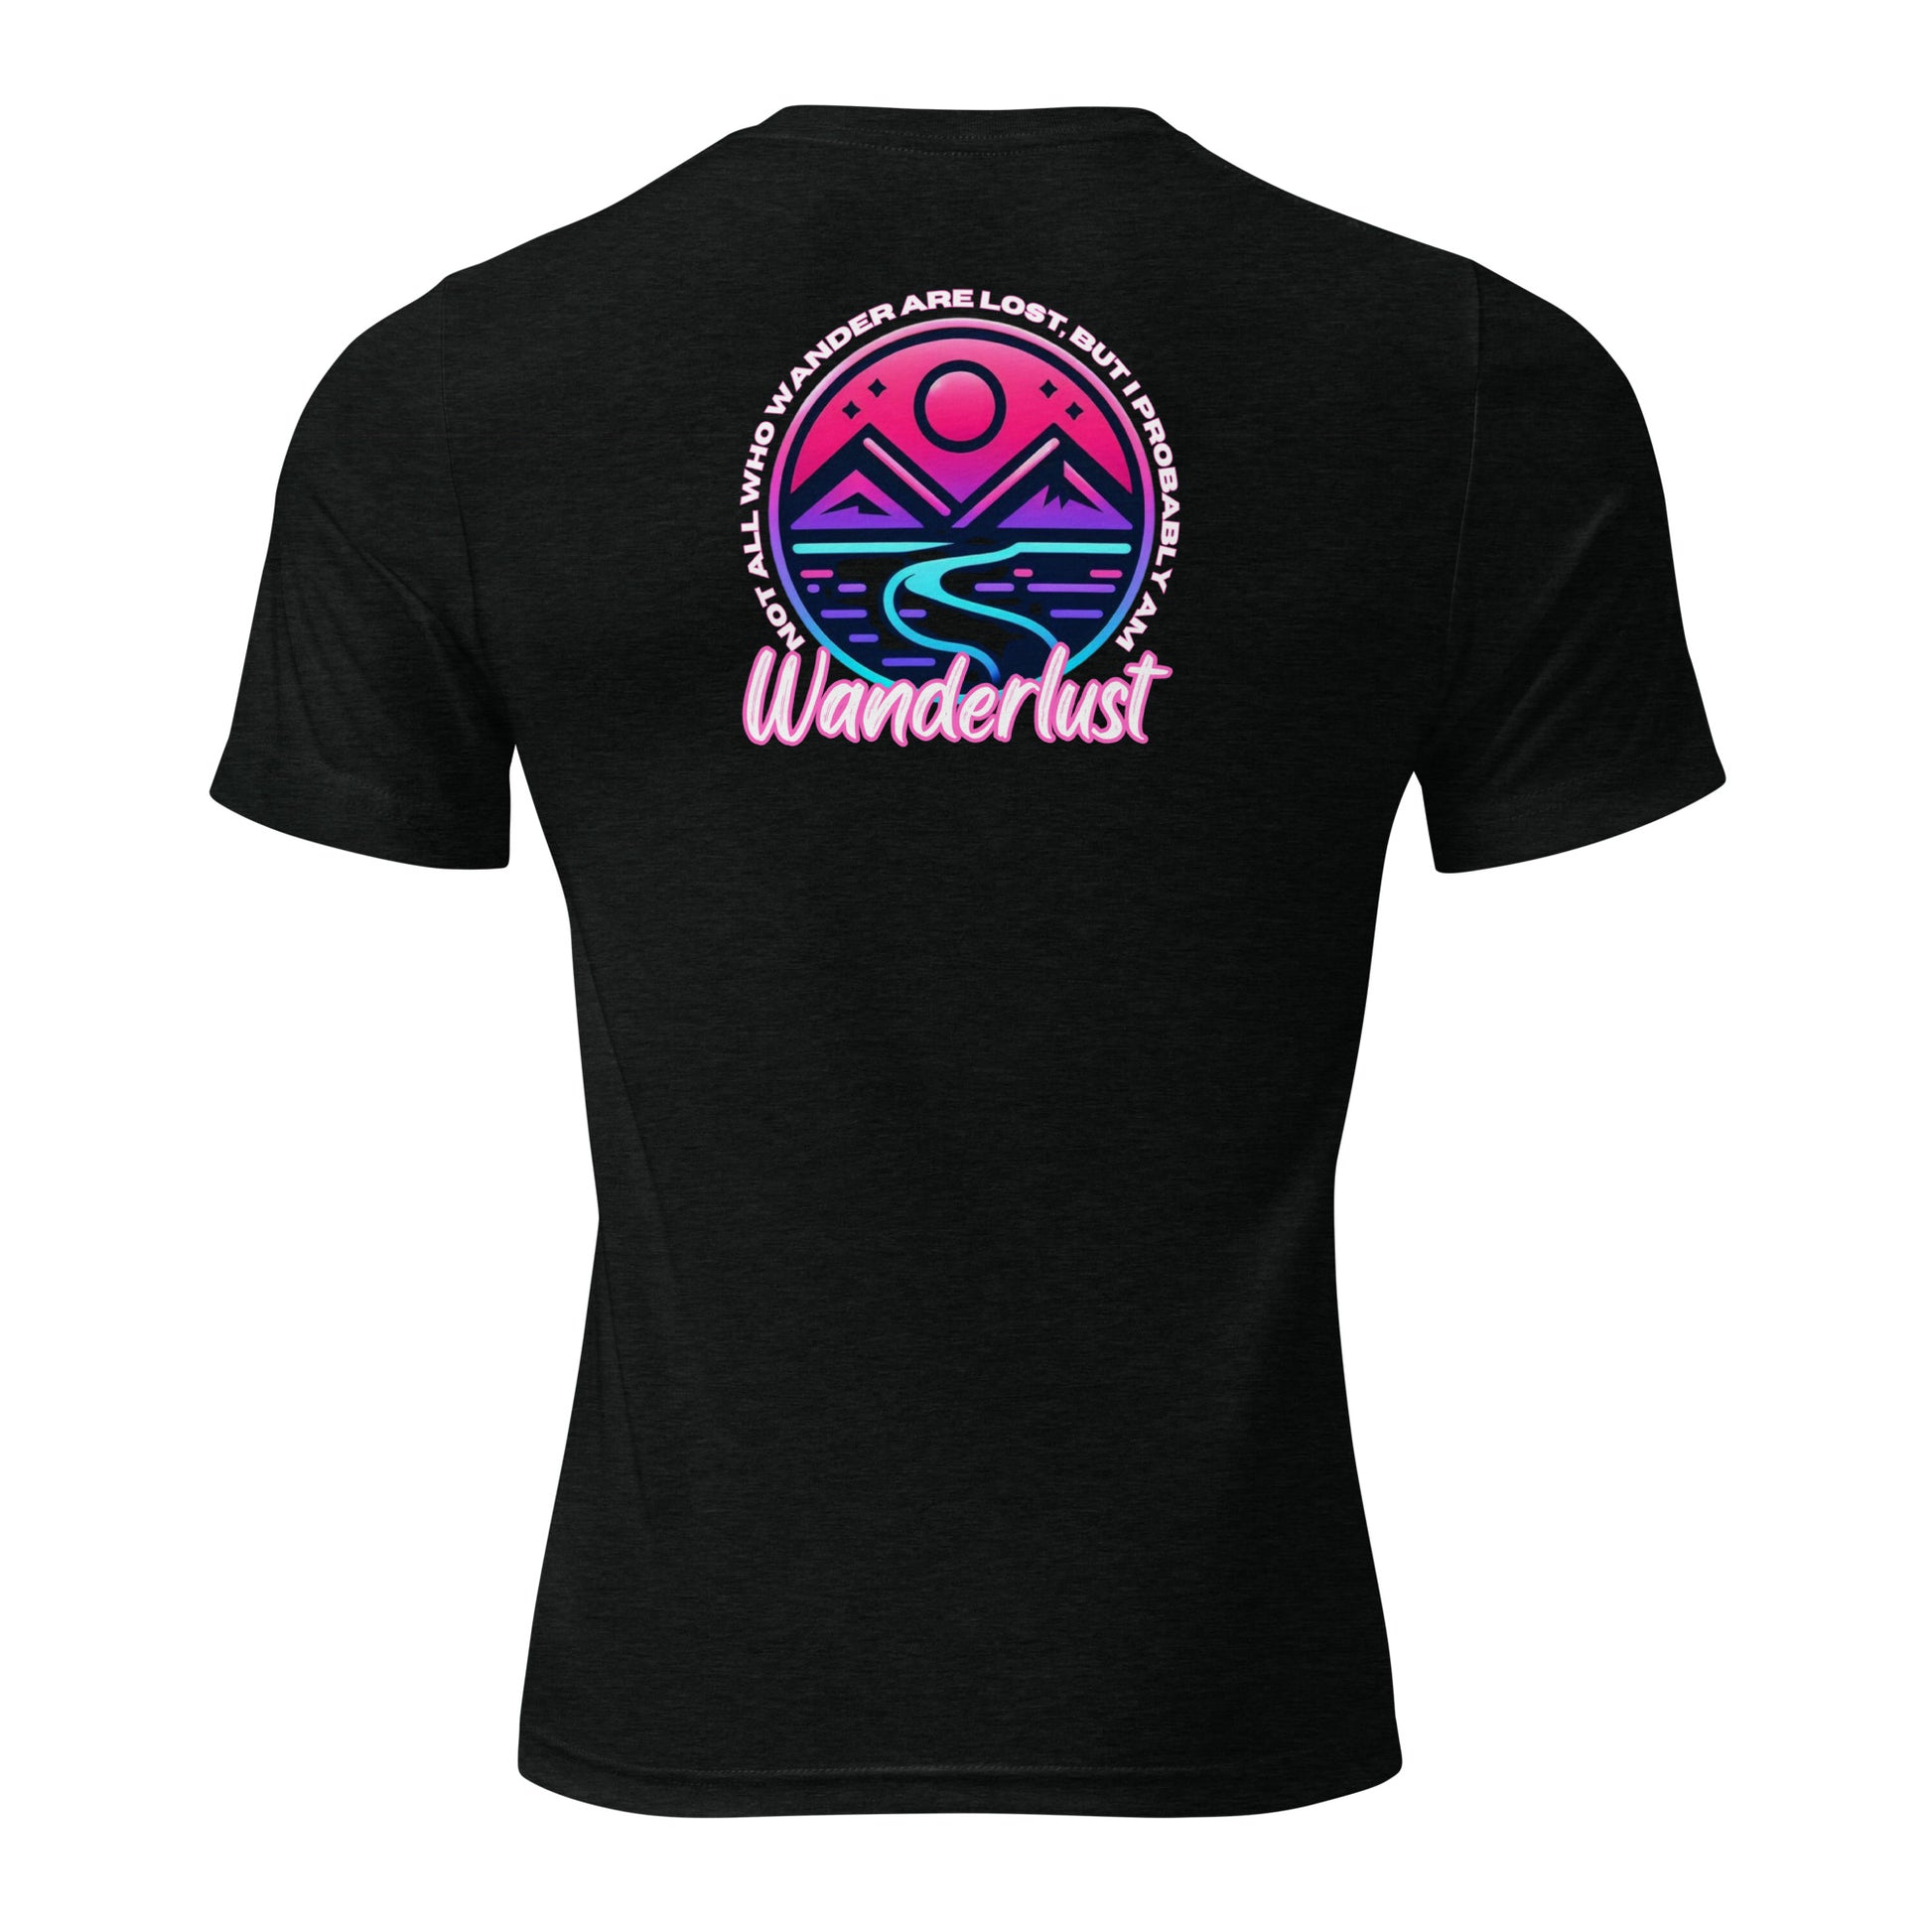 a black t - shirt with the words wanderrust on it